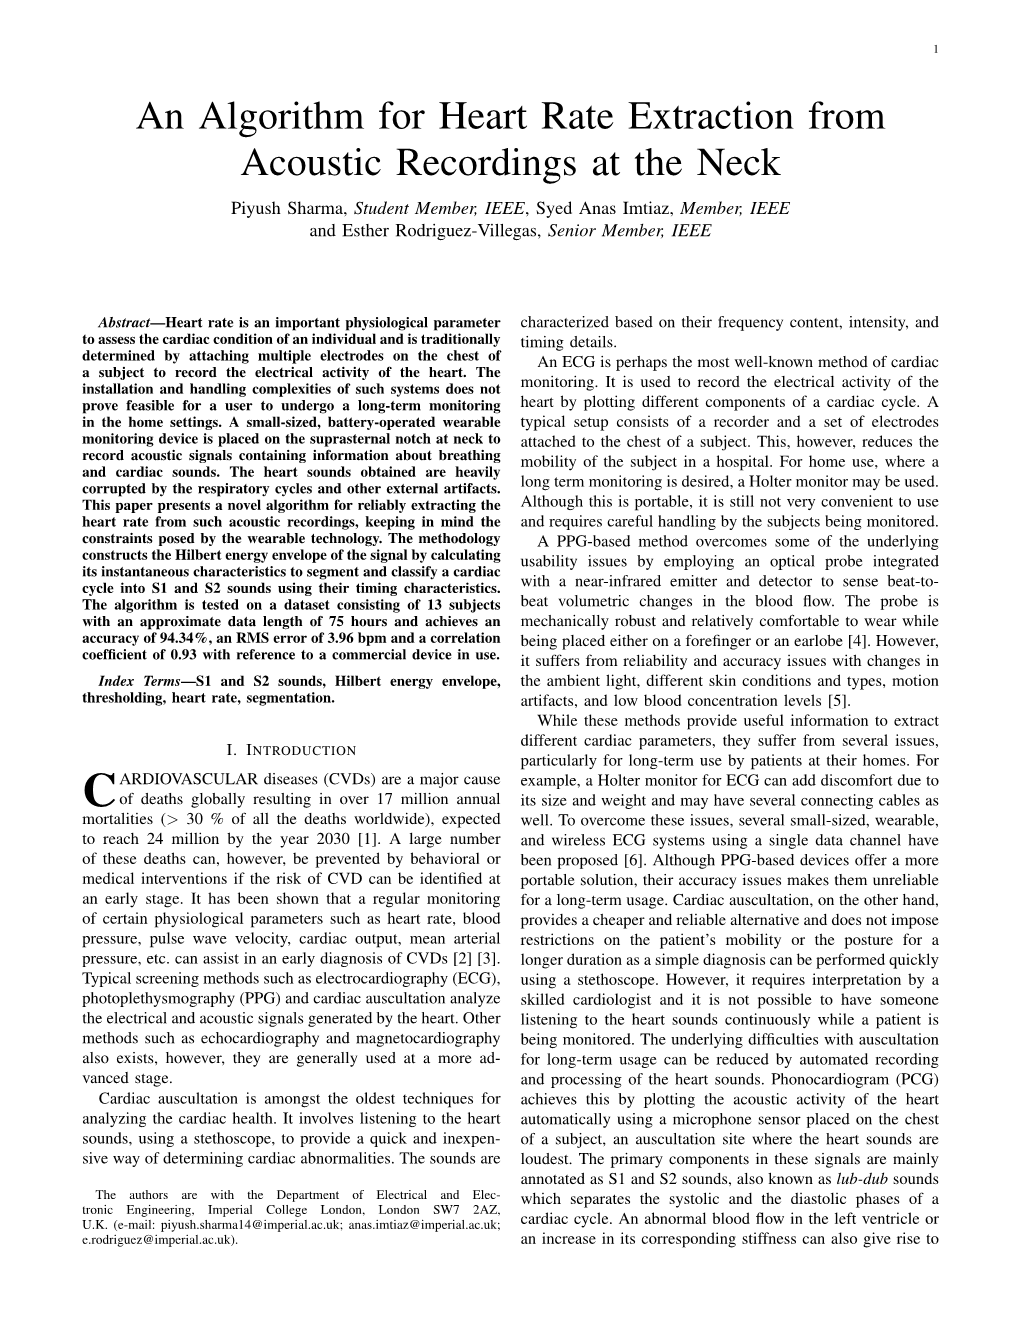 An Algorithm for Heart Rate Extraction from Acoustic Recordings at the Neck